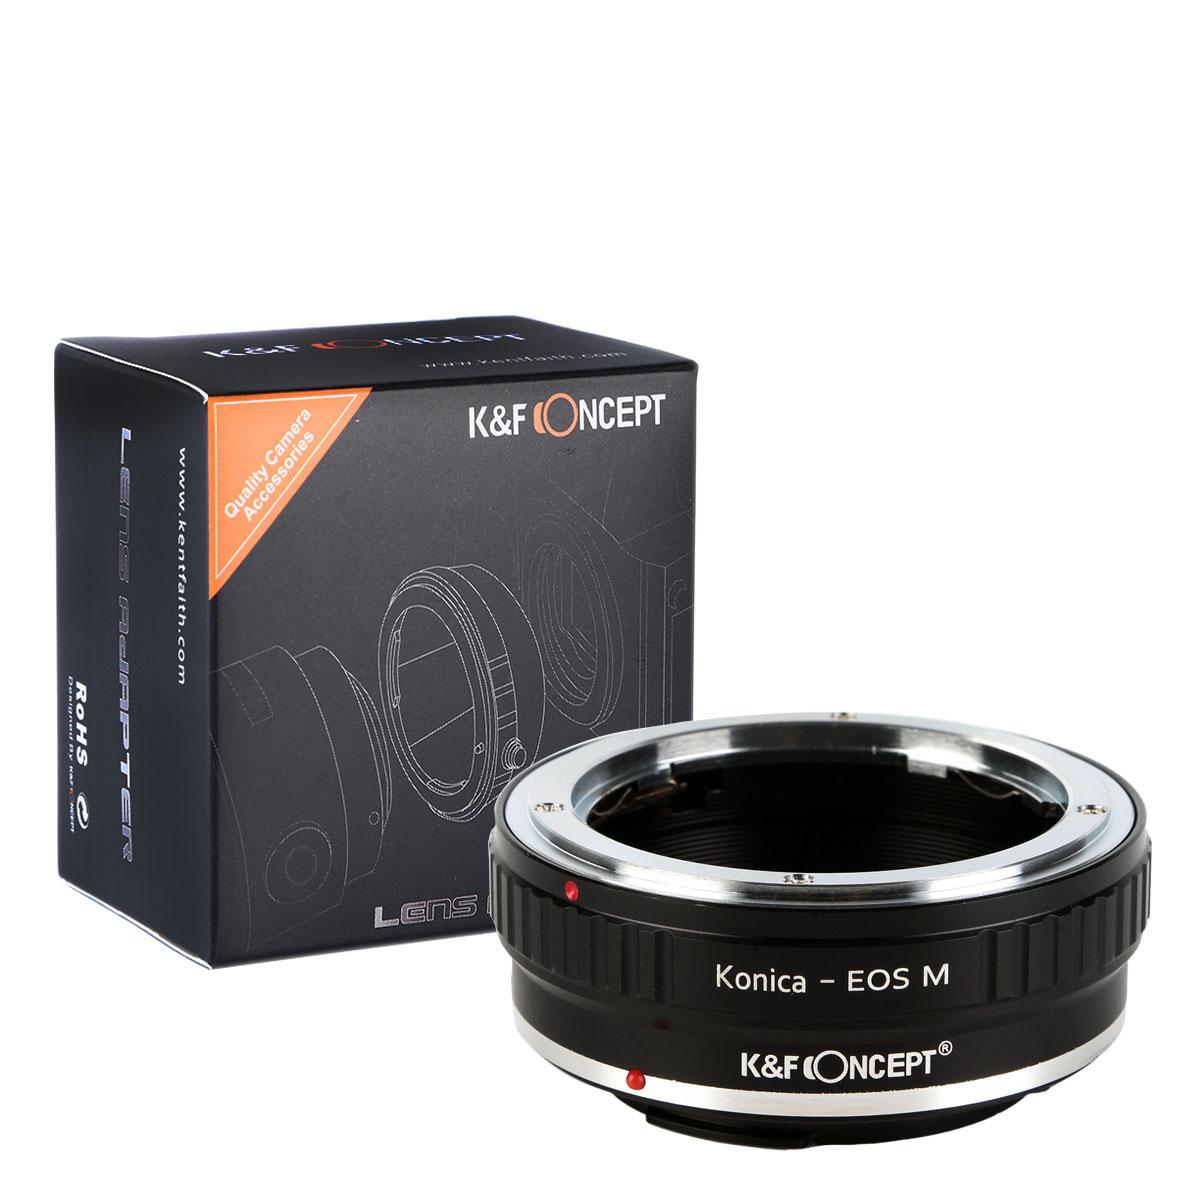 Konica AR Lenses to Canon EOS M Lens Mount Adapter K&F Concept M24141 Lens Adapter